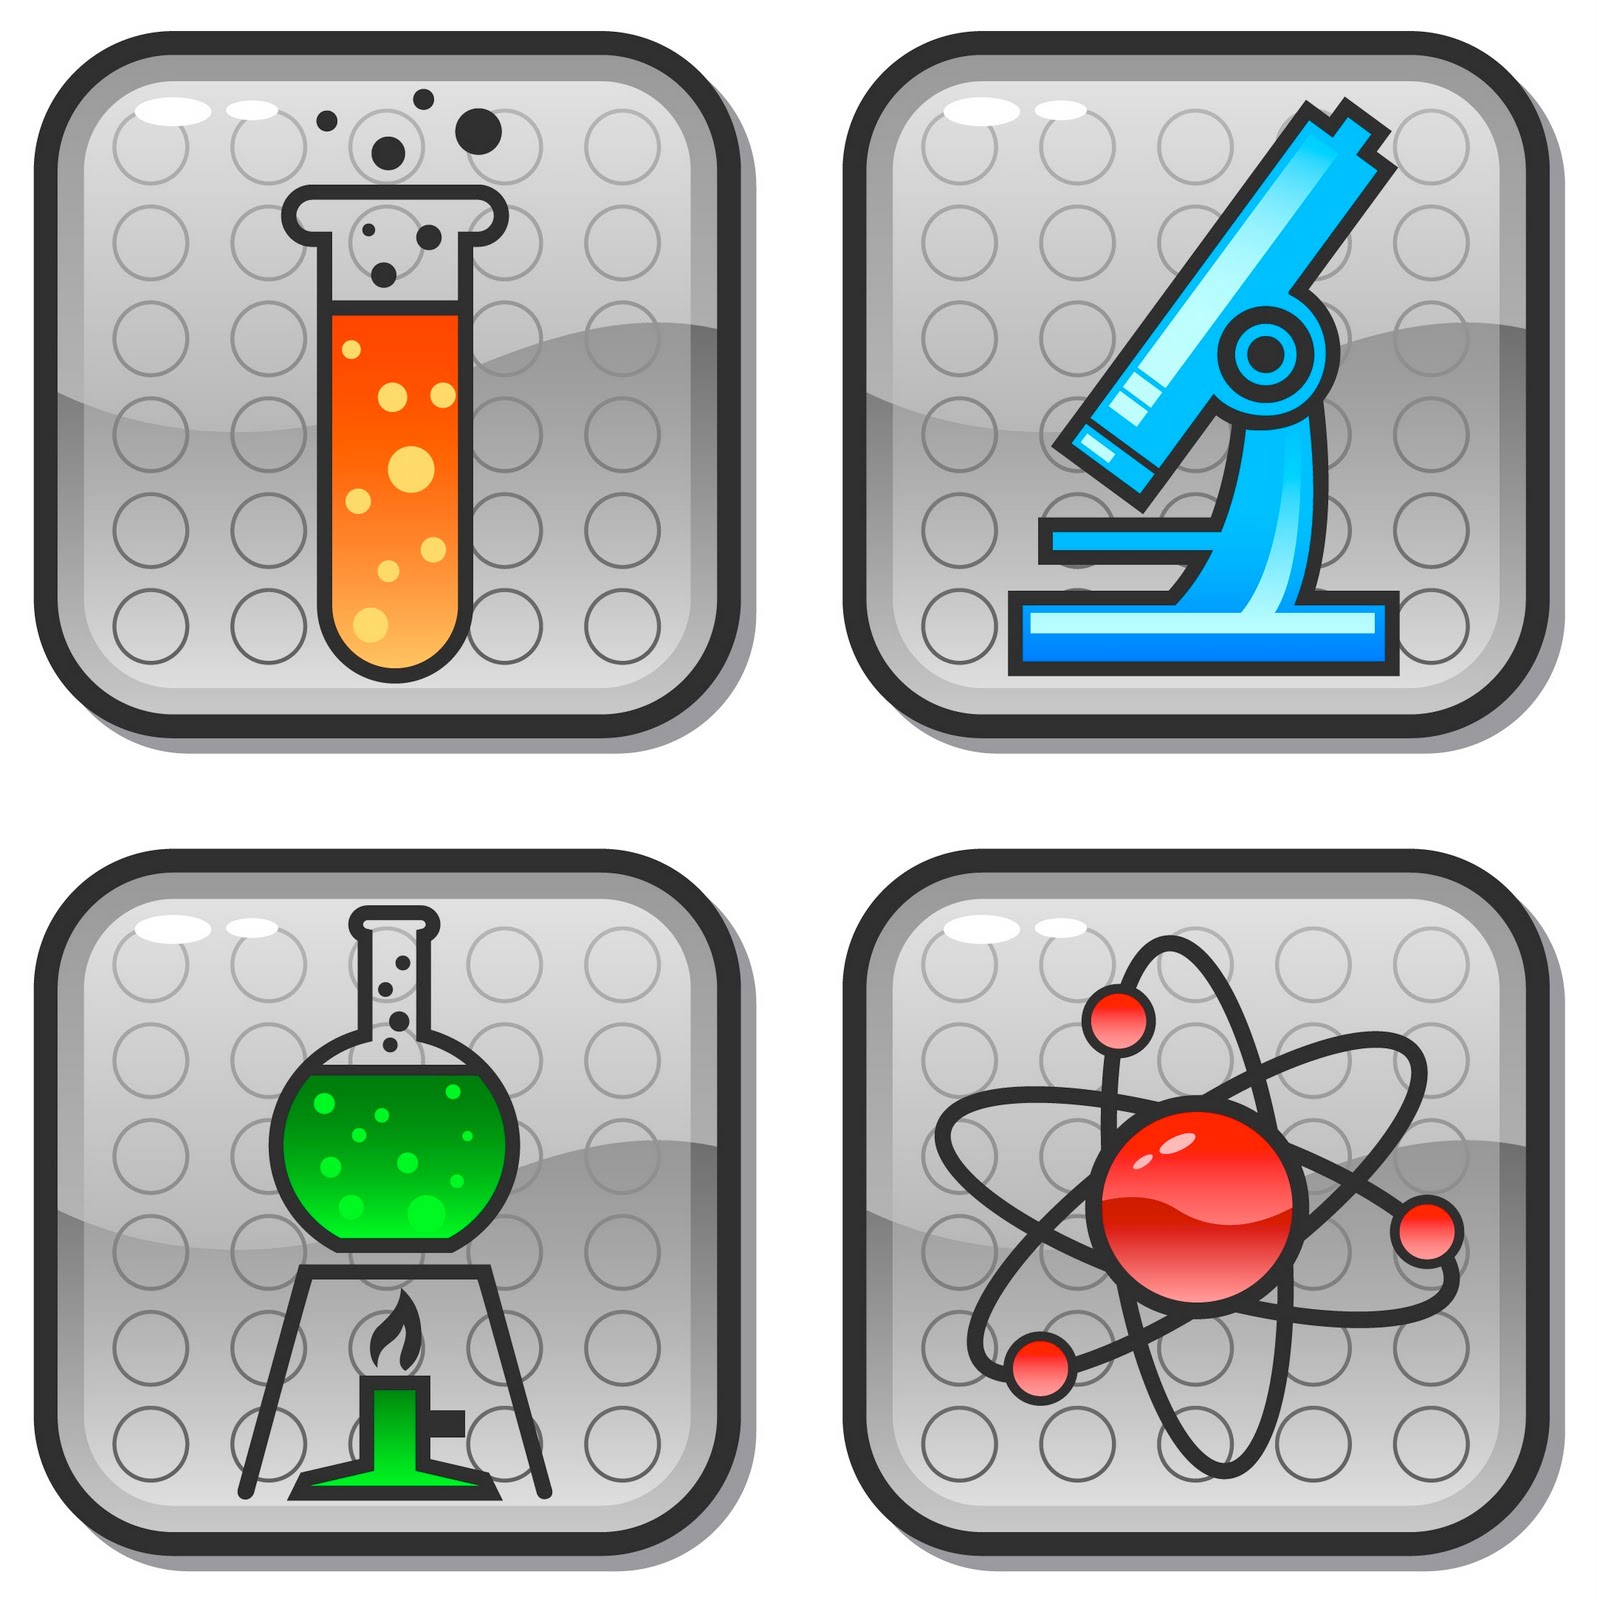 Kids doing science clipart